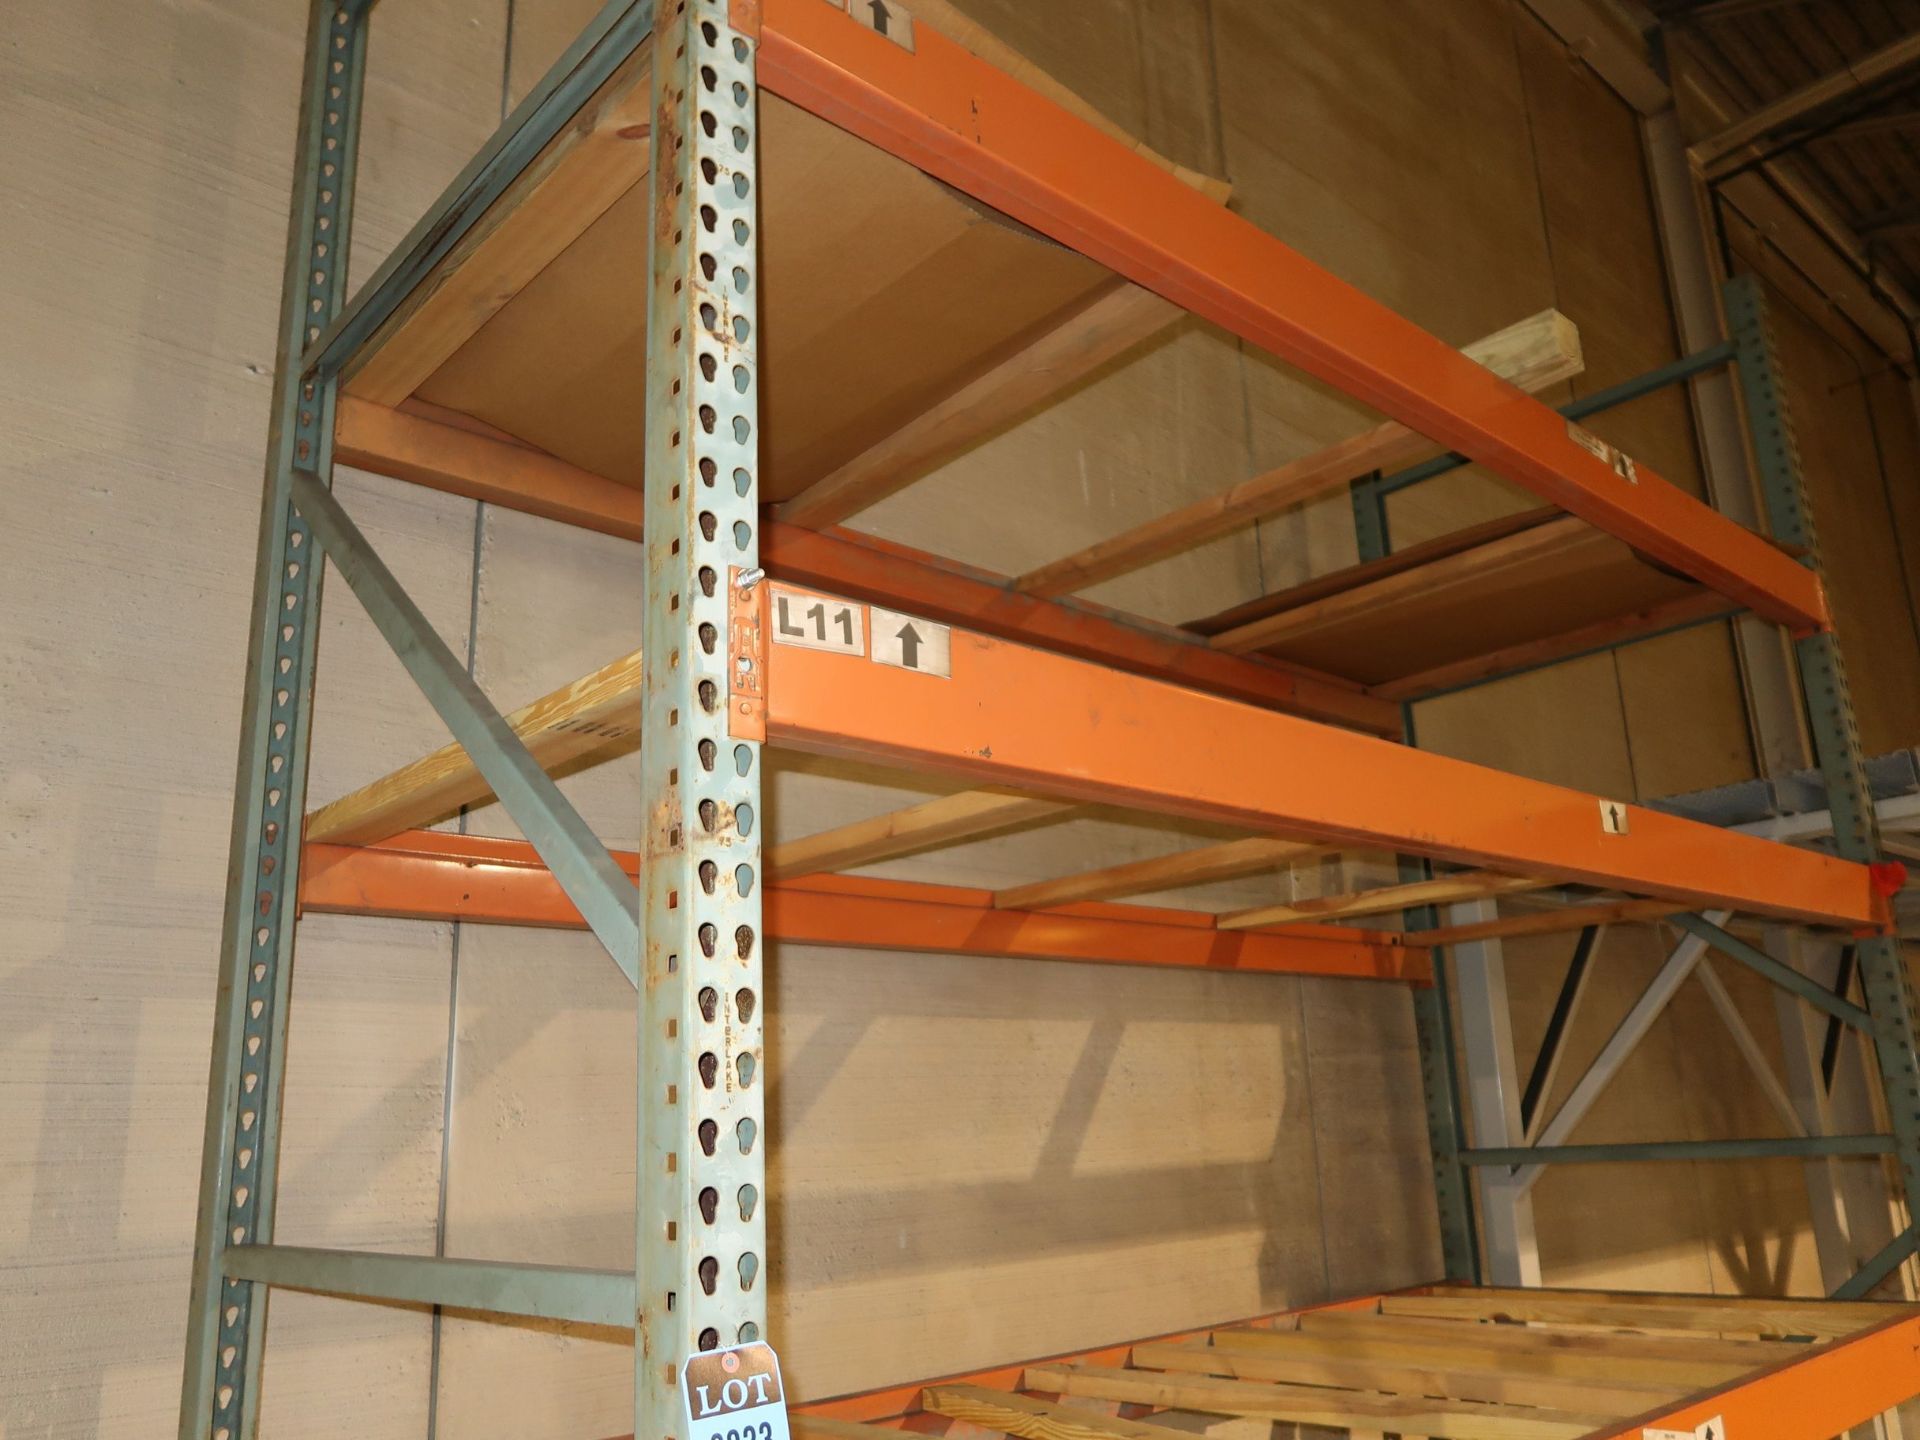 SECTIONS 48" X 120" X 12' HIGH ADJUSTABLE BEAM TEAR DROP STYLE STEPBEAM PALLET RACK - Image 2 of 2